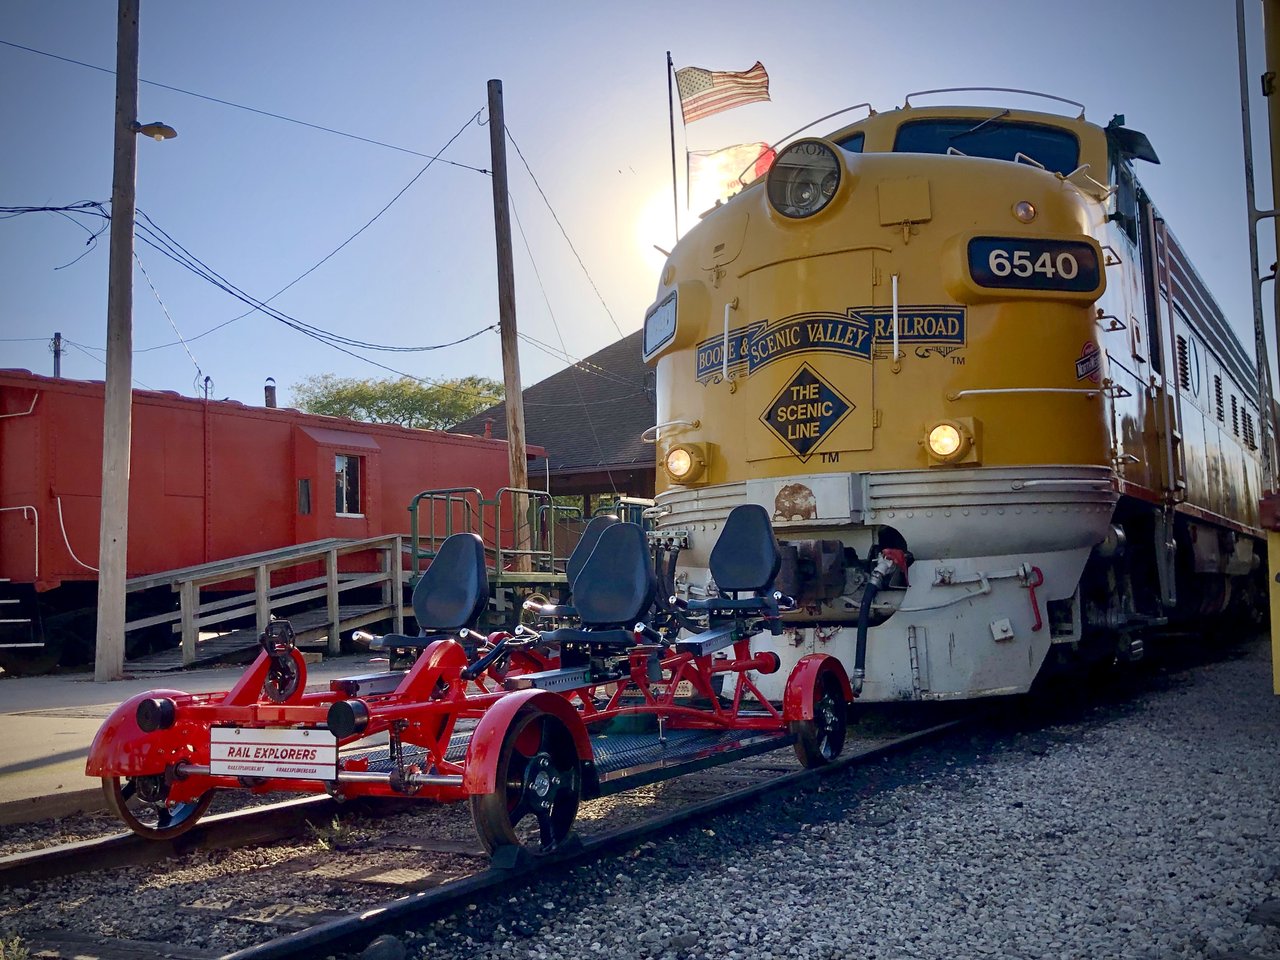 a red four-person rail bike sits in front of a yellow train engine as the sun sets behind them.